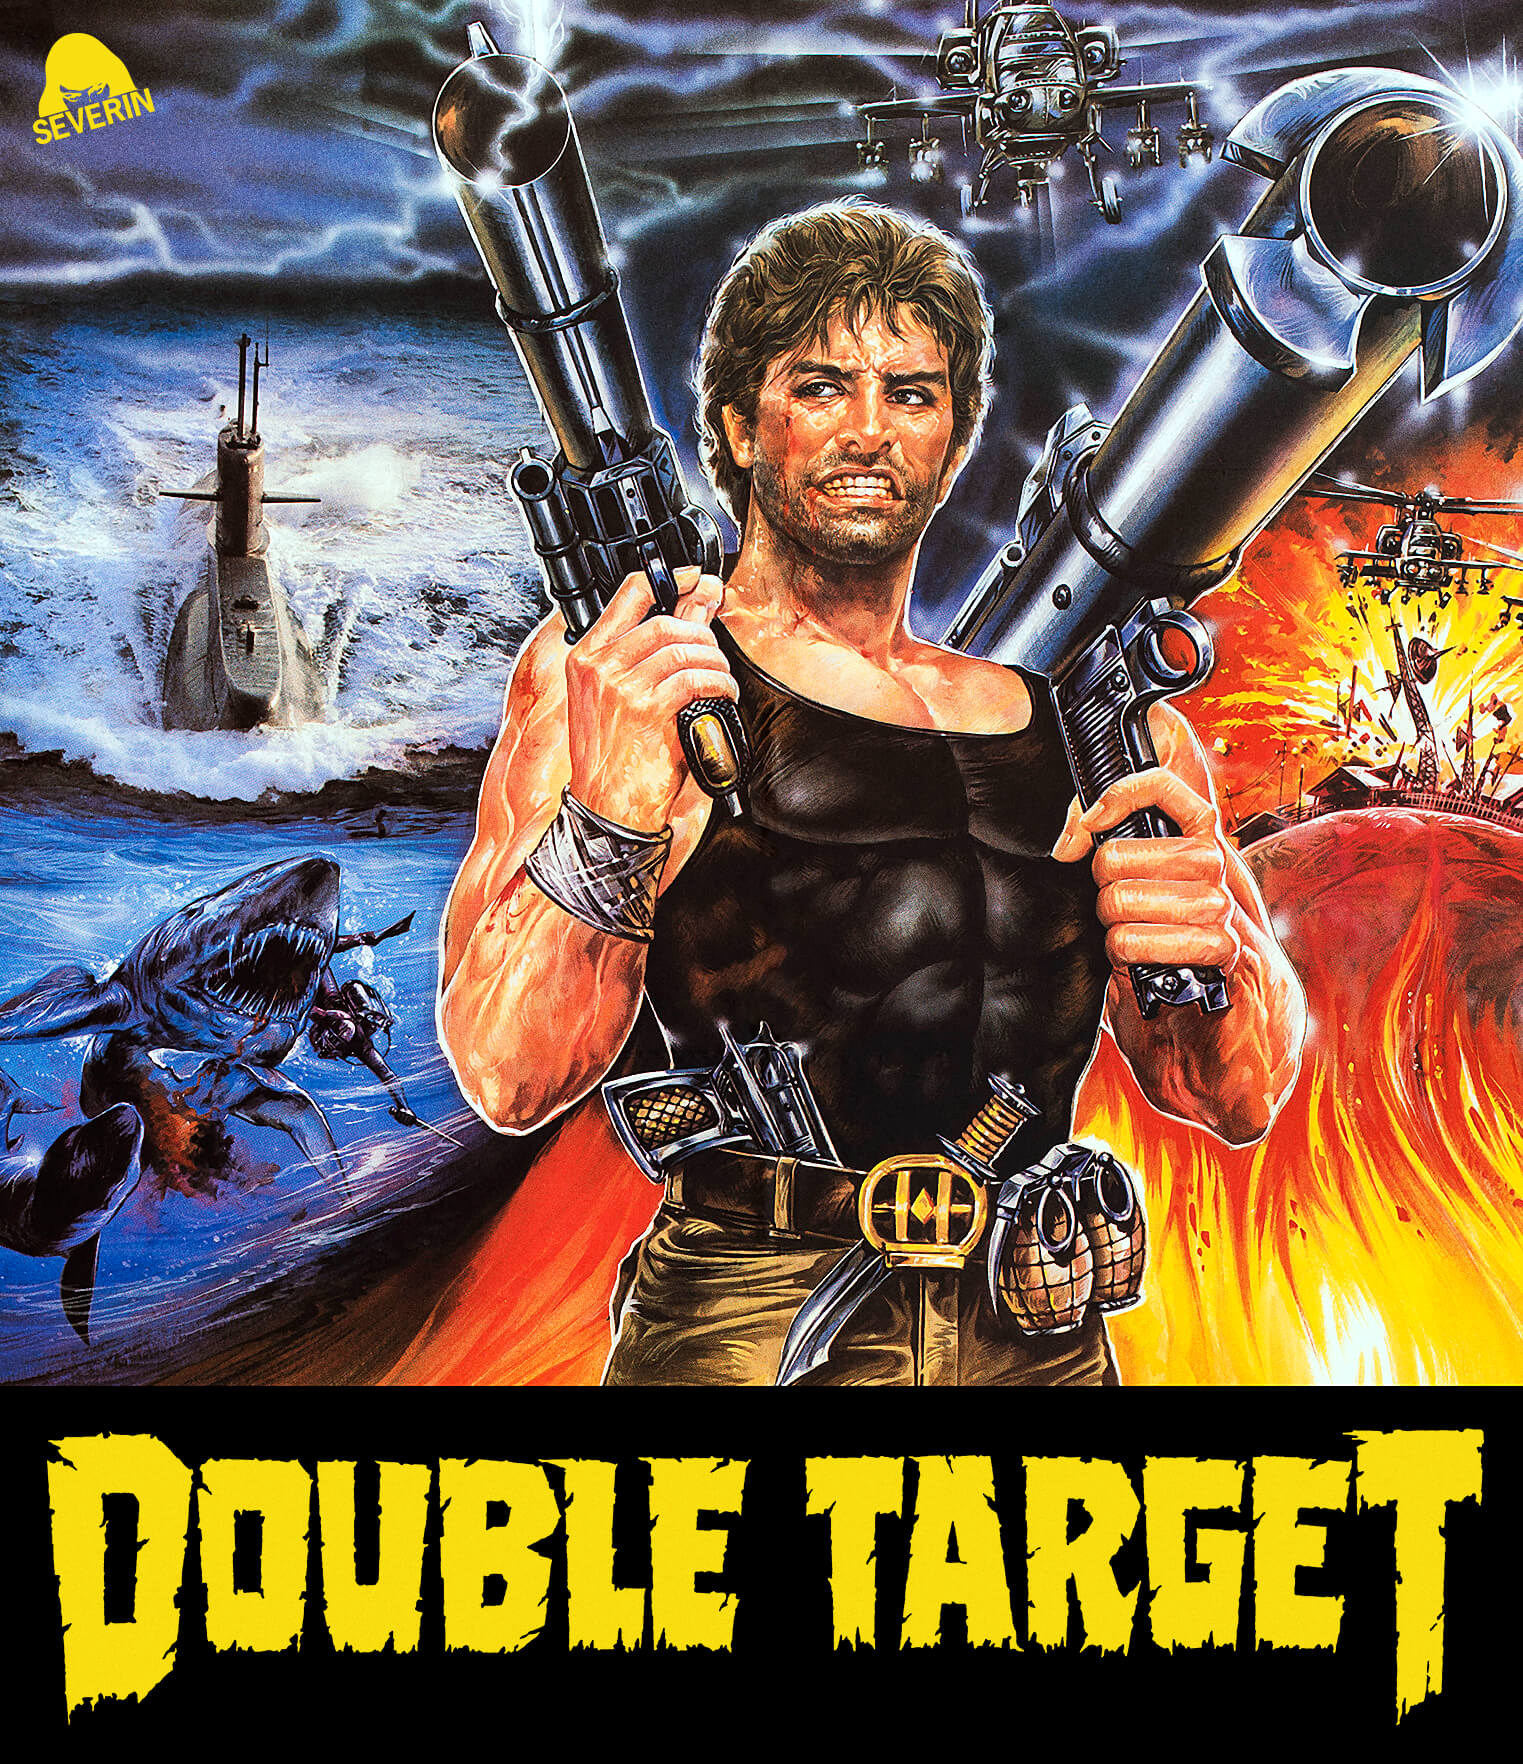 Double Target (Severin) (Blu-Ray)